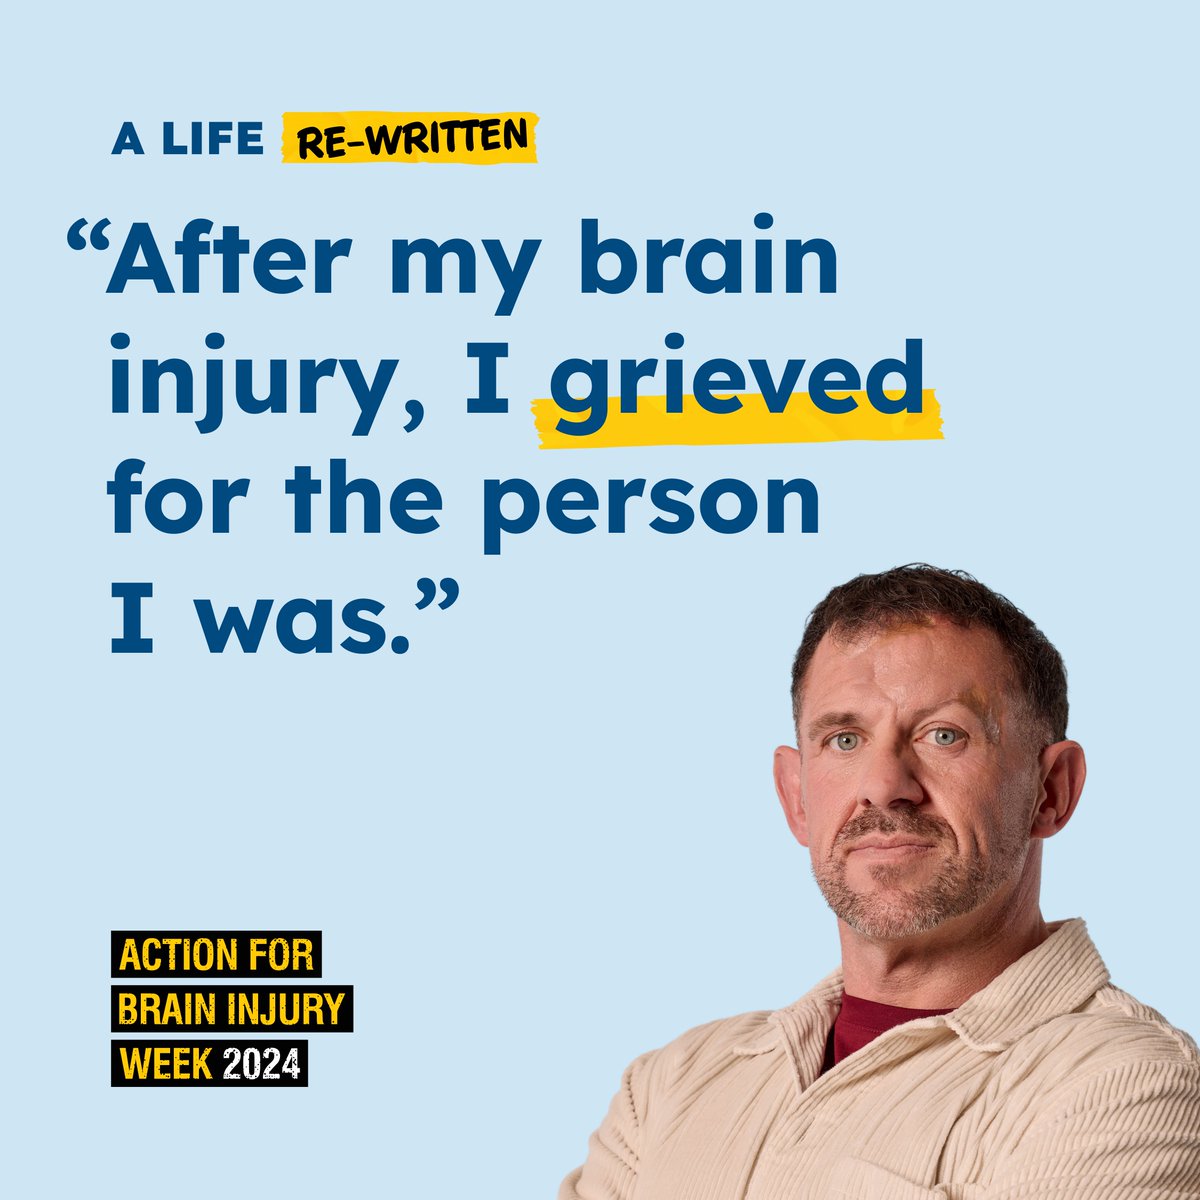 “You can have a trauma in life, you can maybe look a different way with scarring, lose your dream, lose something in life, struggle with your mental health, but you can still turn your life around and achieve great things.” Andrew Jenkins buff.ly/3QWK5mi
#ABIWeek